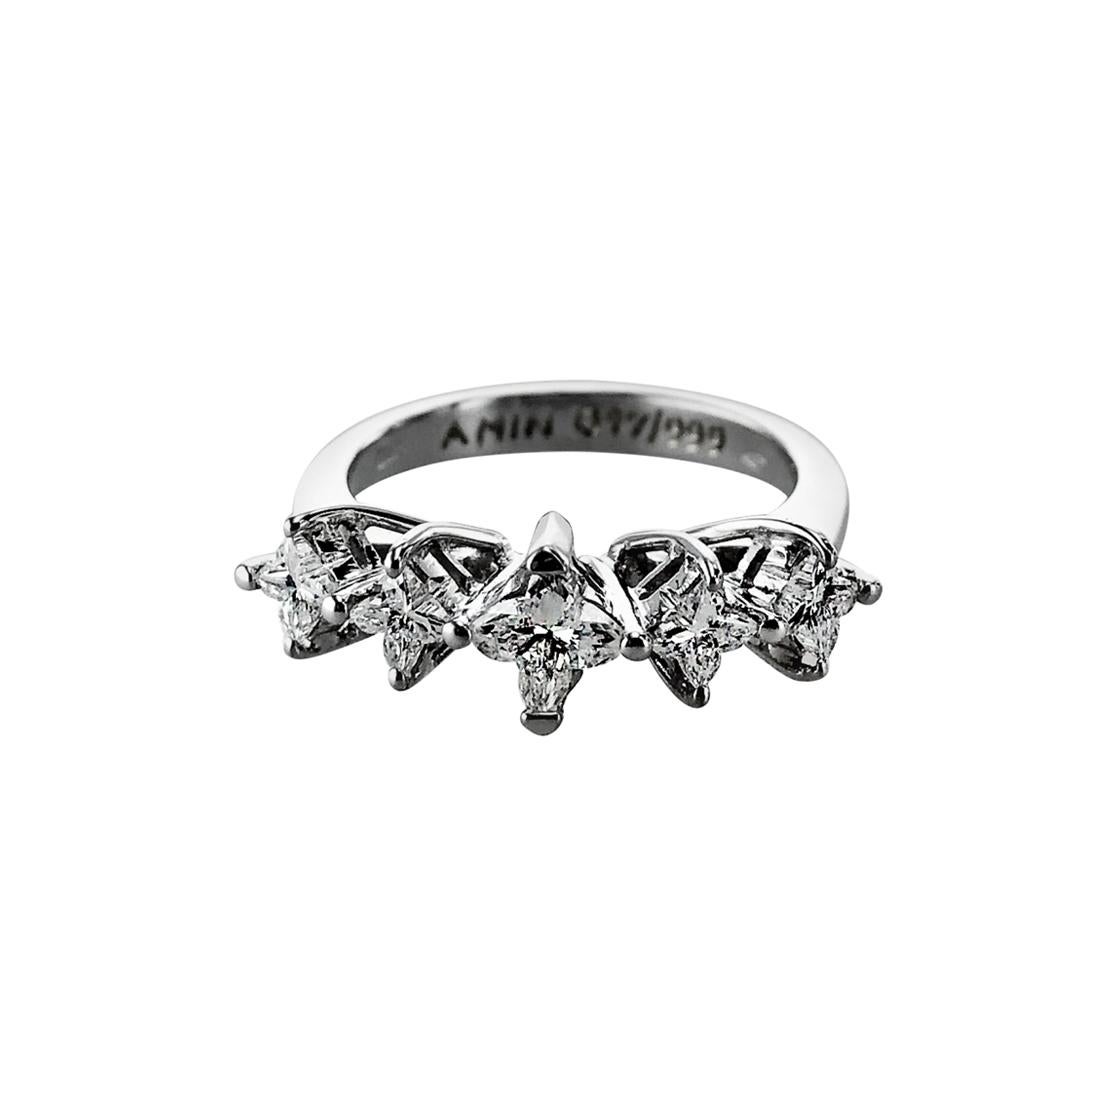 5 Stone 1.25 Carat Diamond in 18Kt White Gold Cocktail Ring